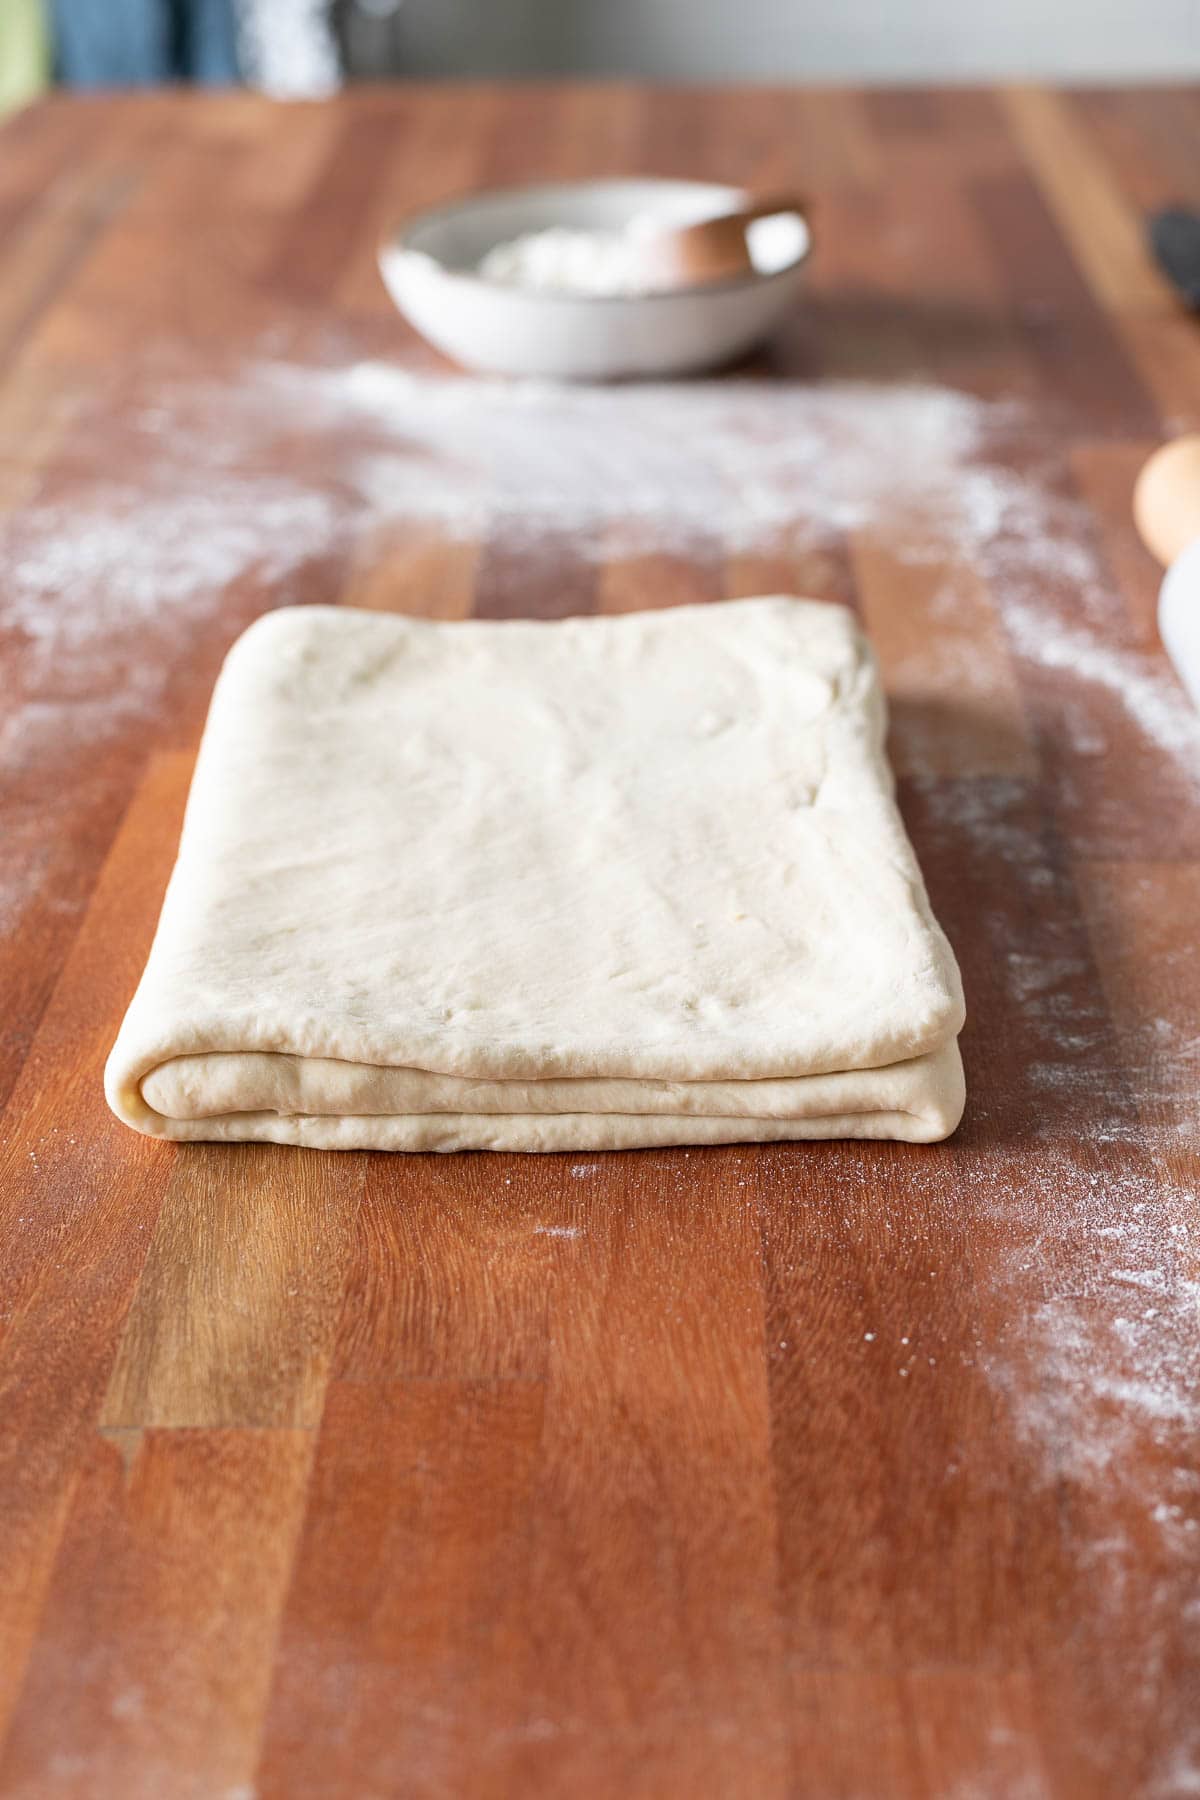 Croissant dough folded like a book with a bowl of flour